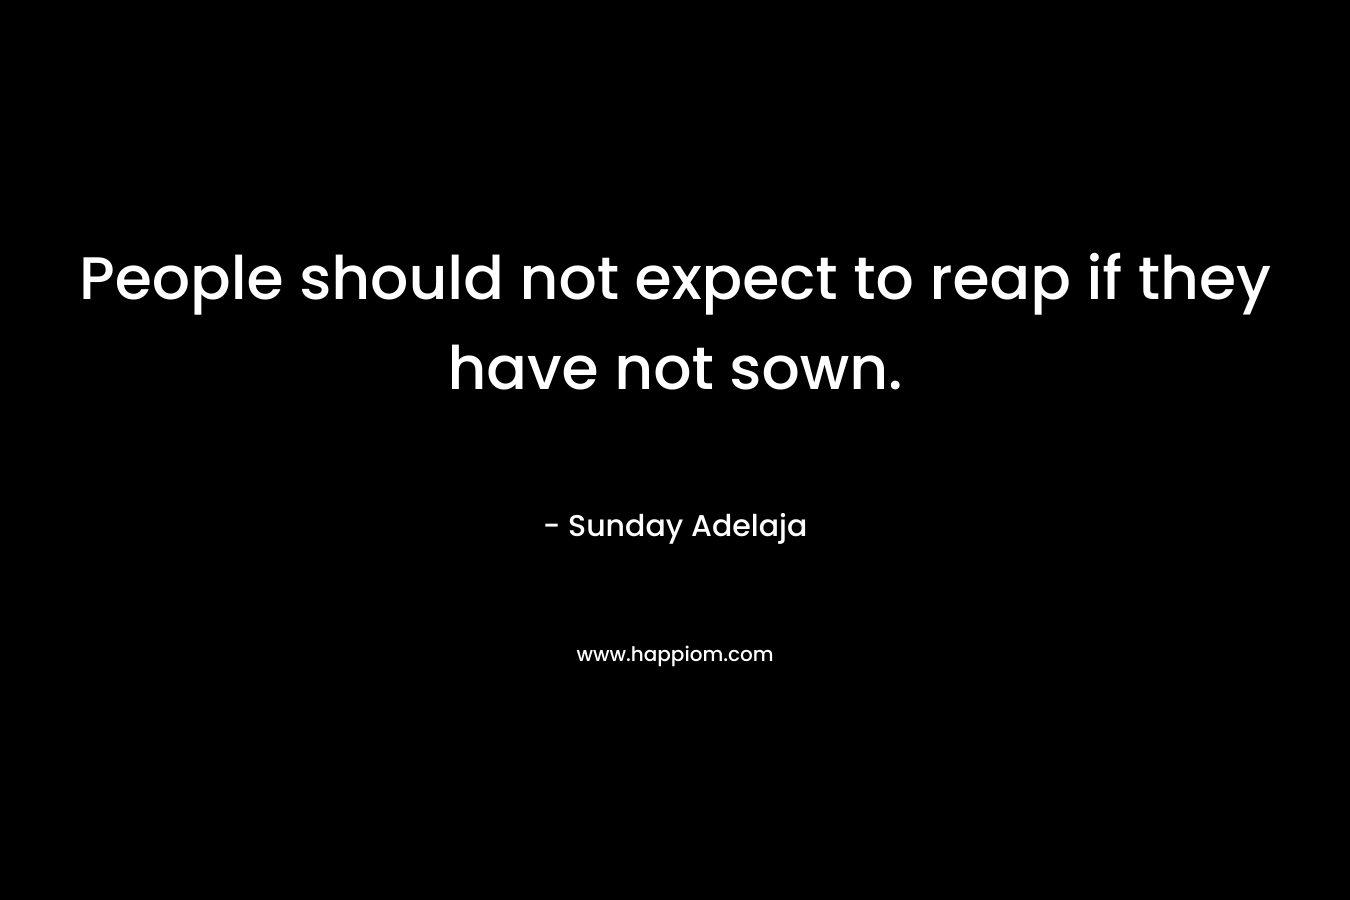 People should not expect to reap if they have not sown.